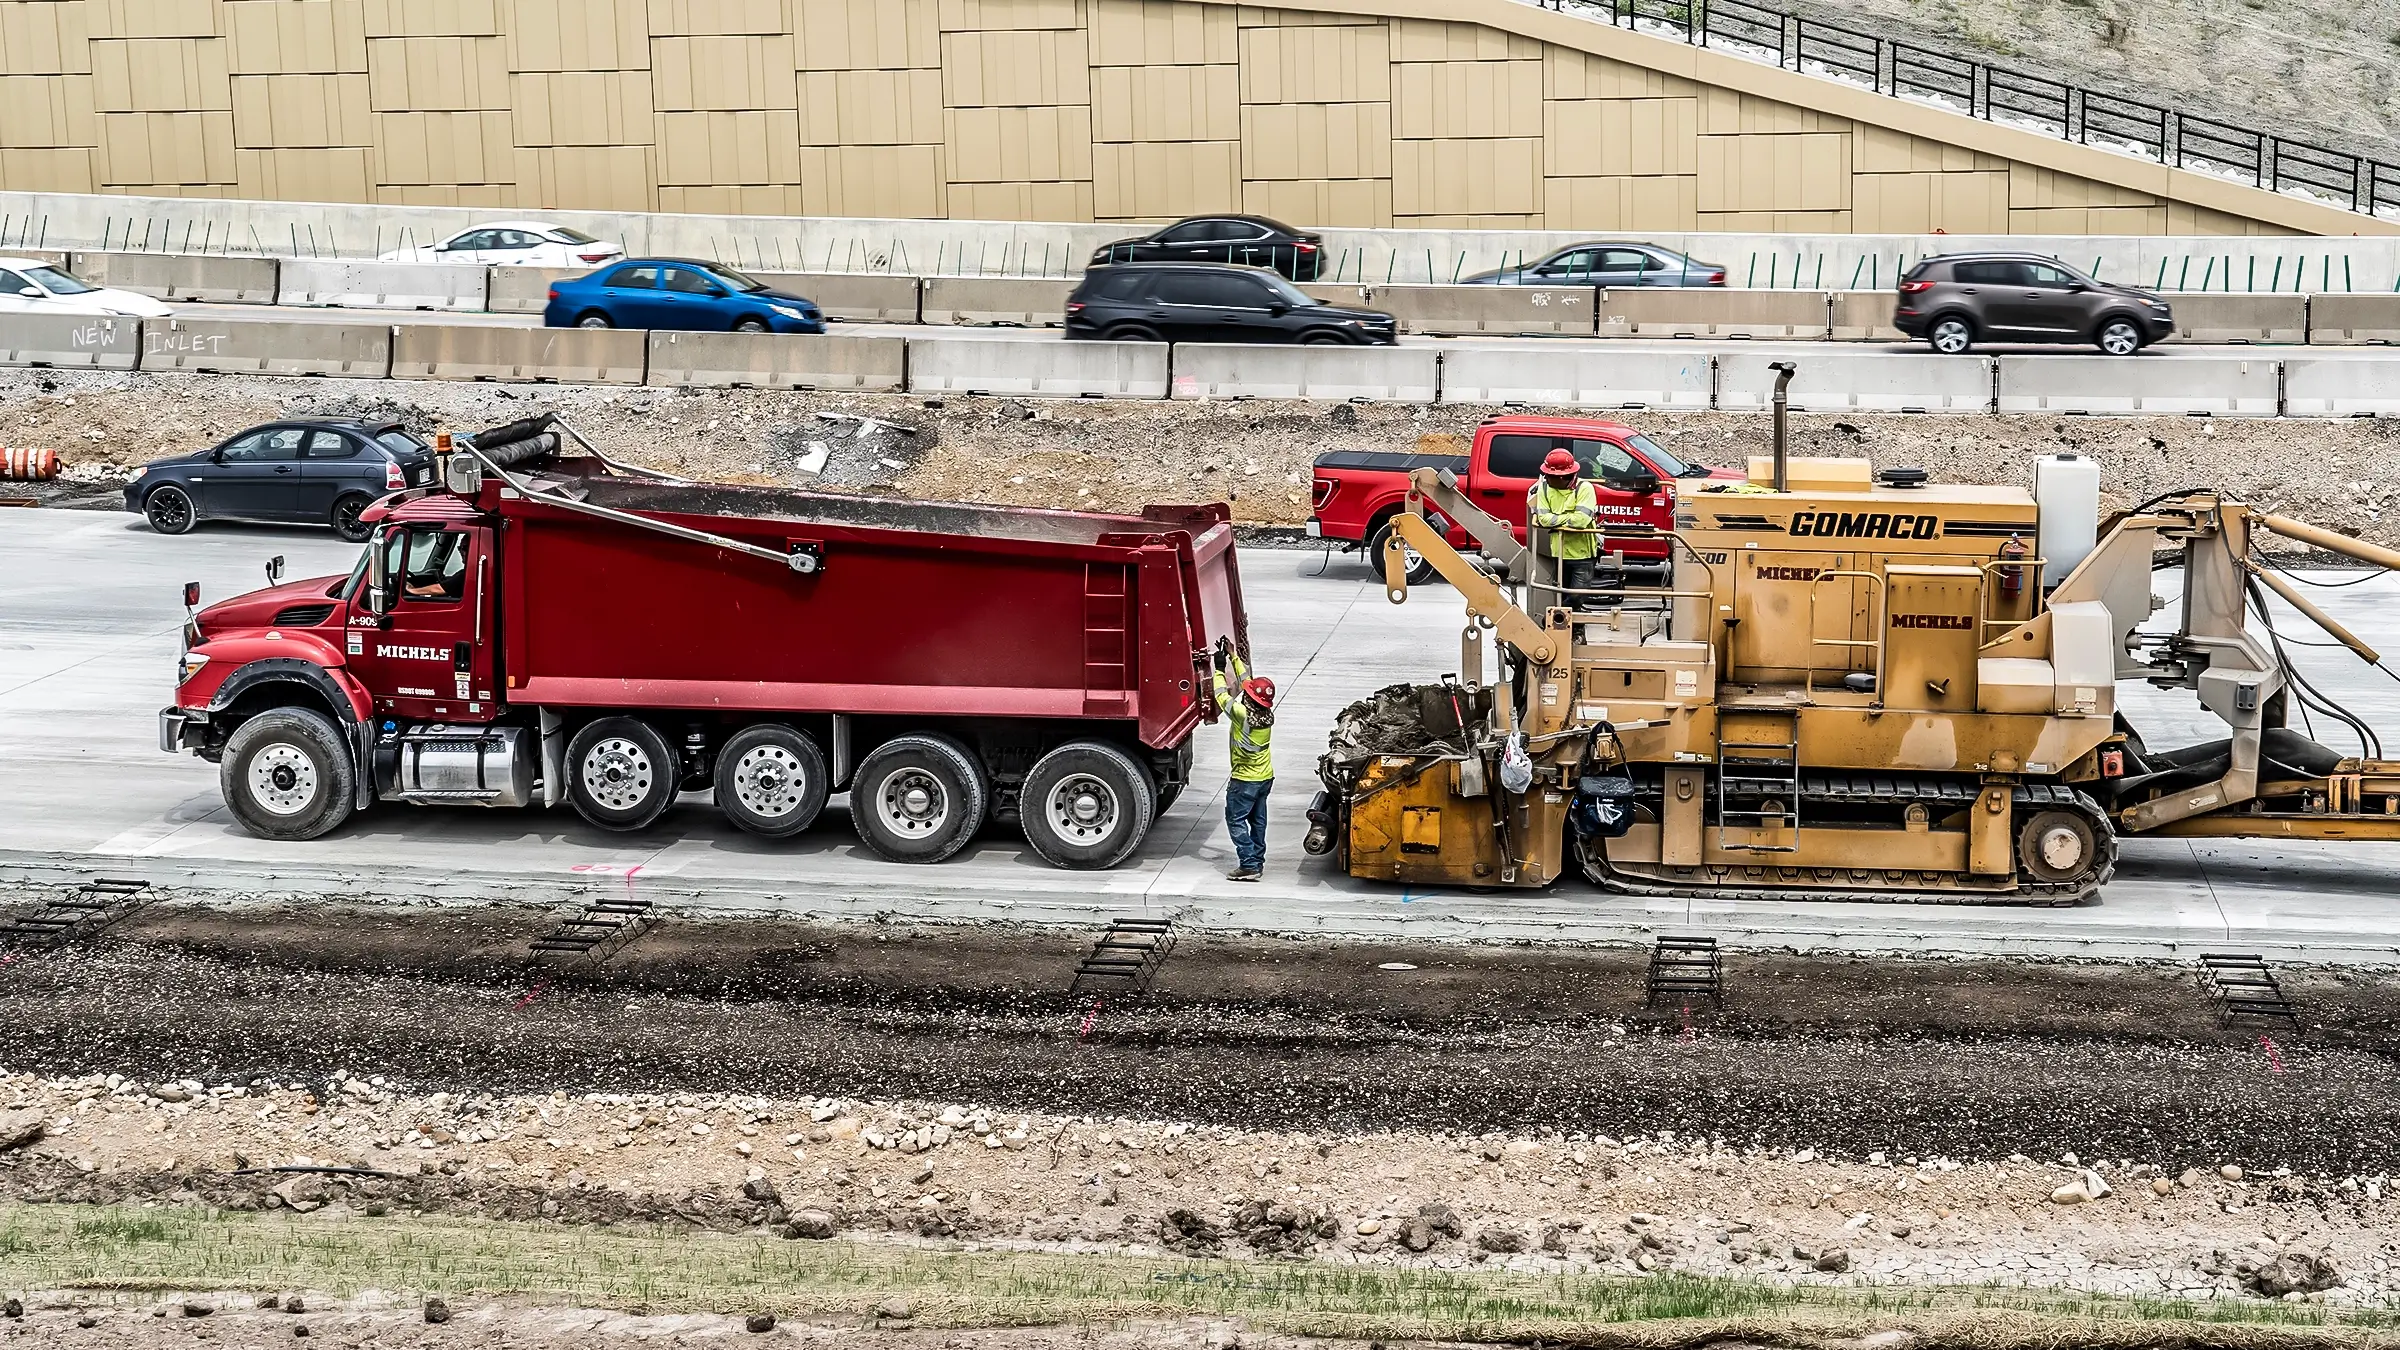 A dump truck and paving machine on a jobsite.